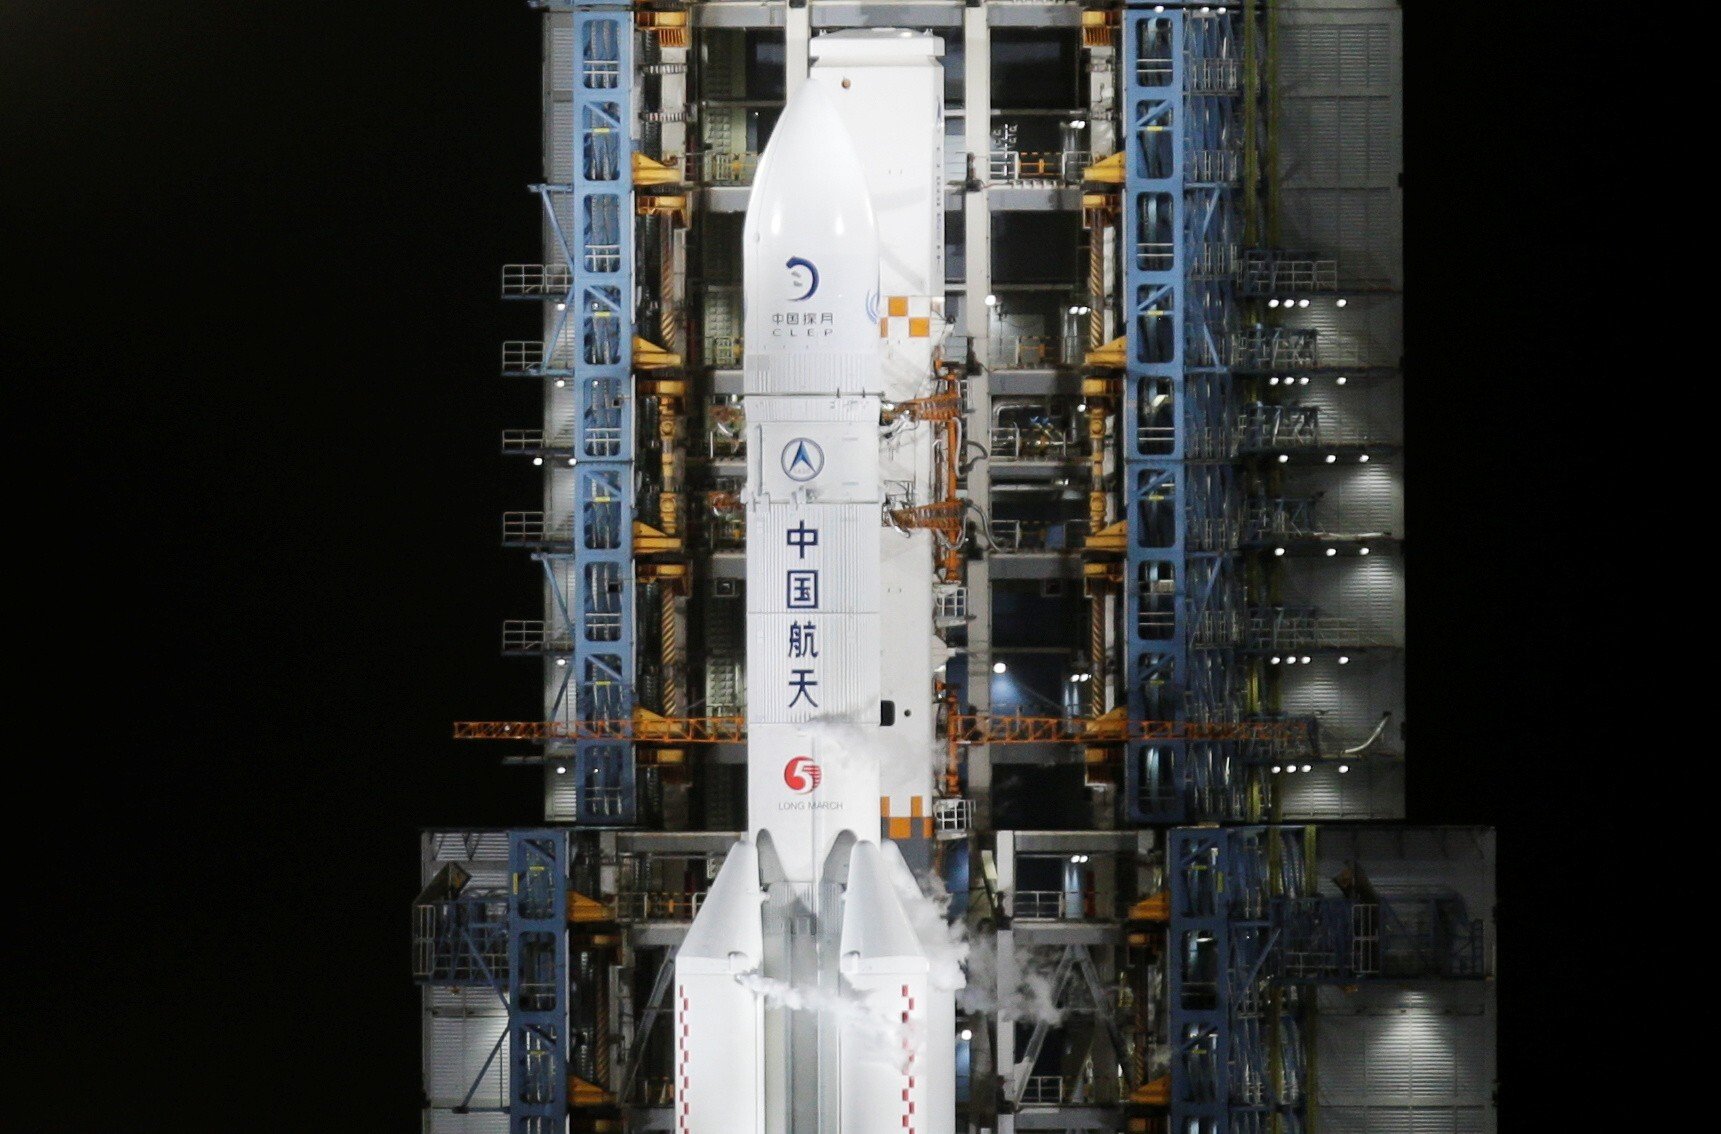 The Chang’e 5 lunar probe, carried by a Long March rocket, before take-off on its way to the moon. Photo: Reuters